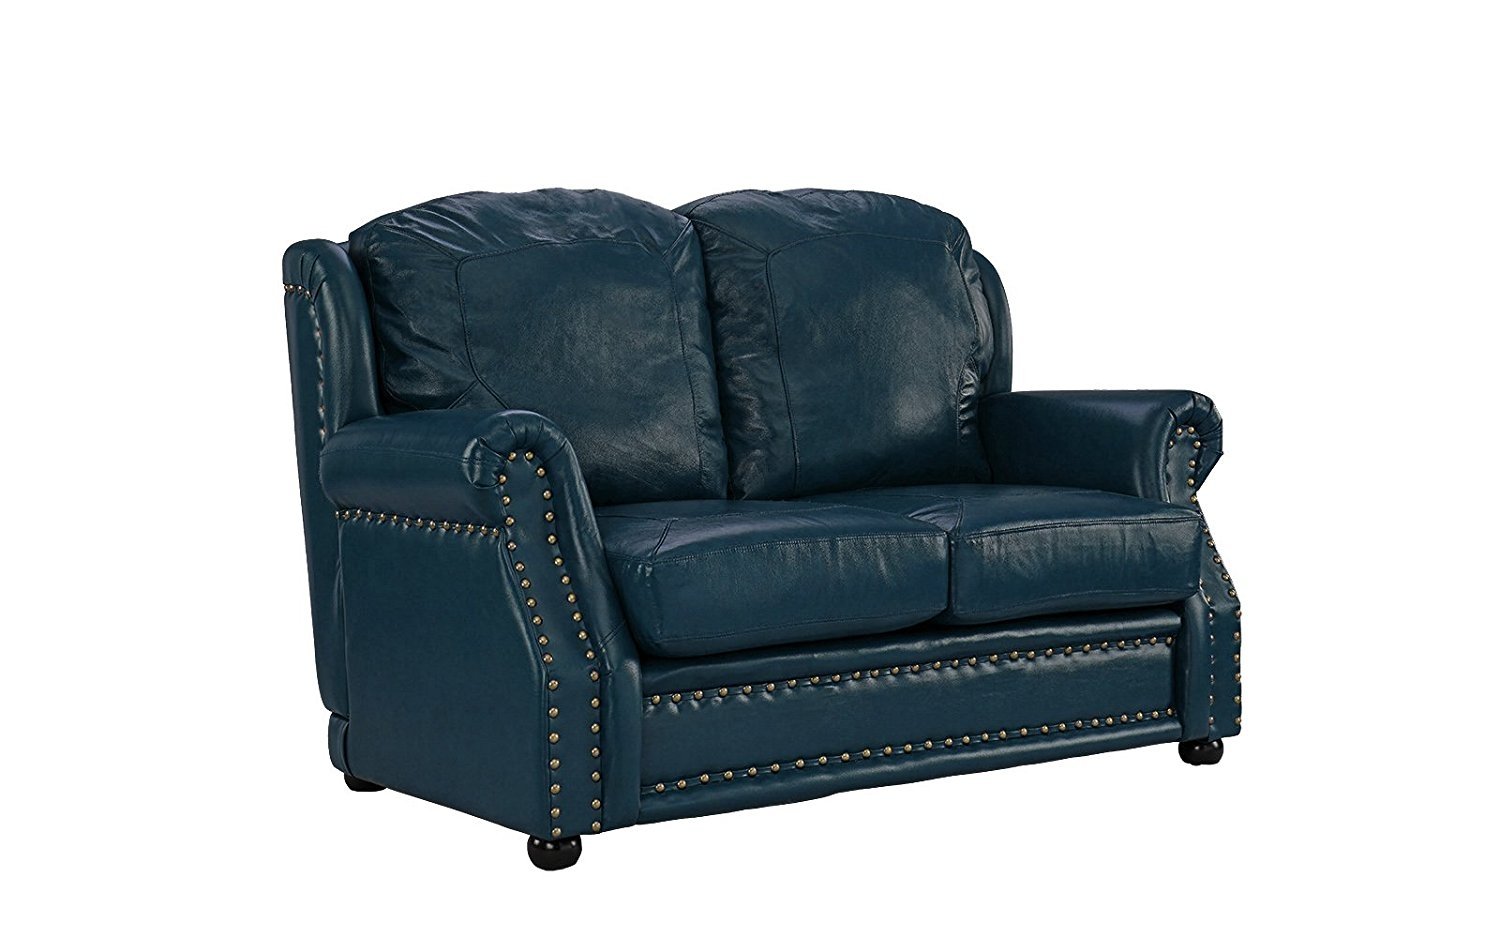 Leather Sofa 2 Seater, Living Room Couch Love Seat with Nailhead Trim (Blue) 662187610559 eBay